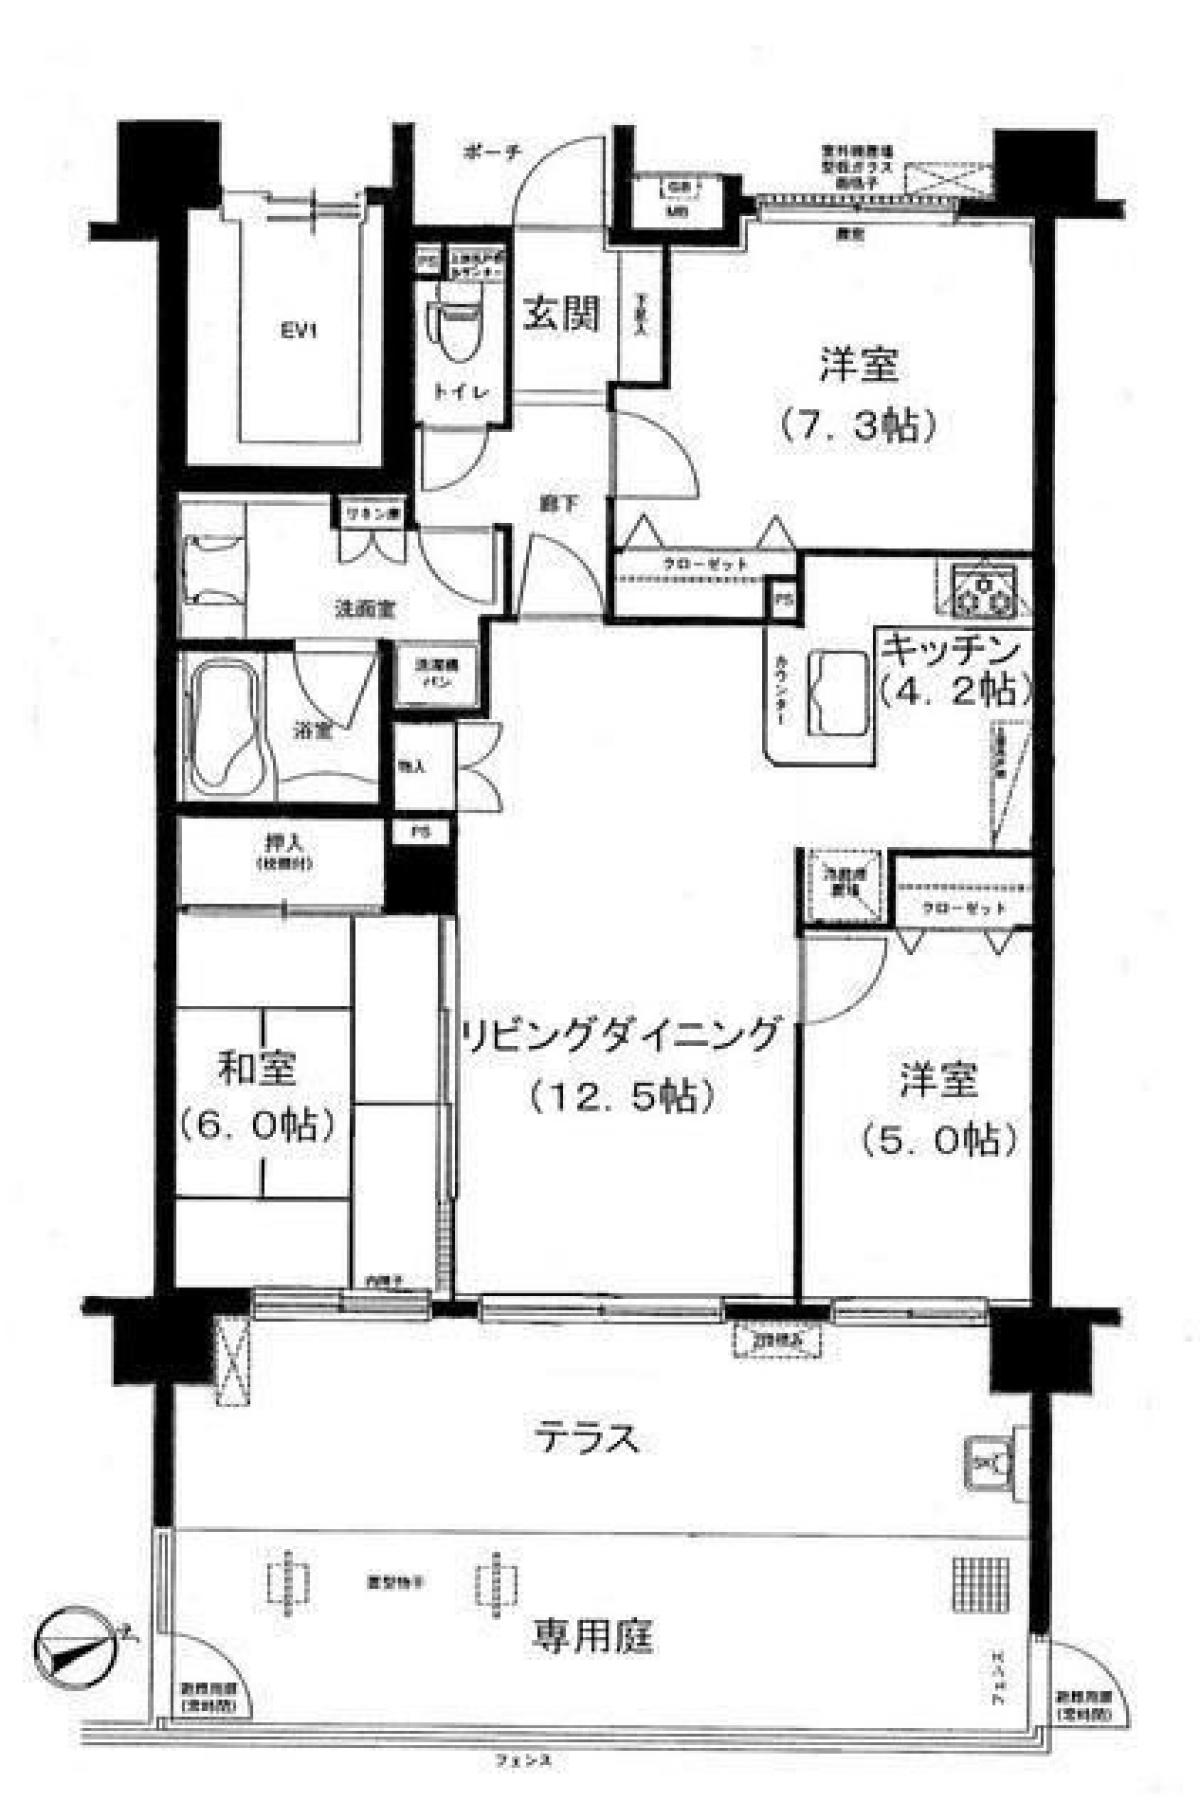 Picture of Apartment For Sale in Funabashi Shi, Chiba, Japan